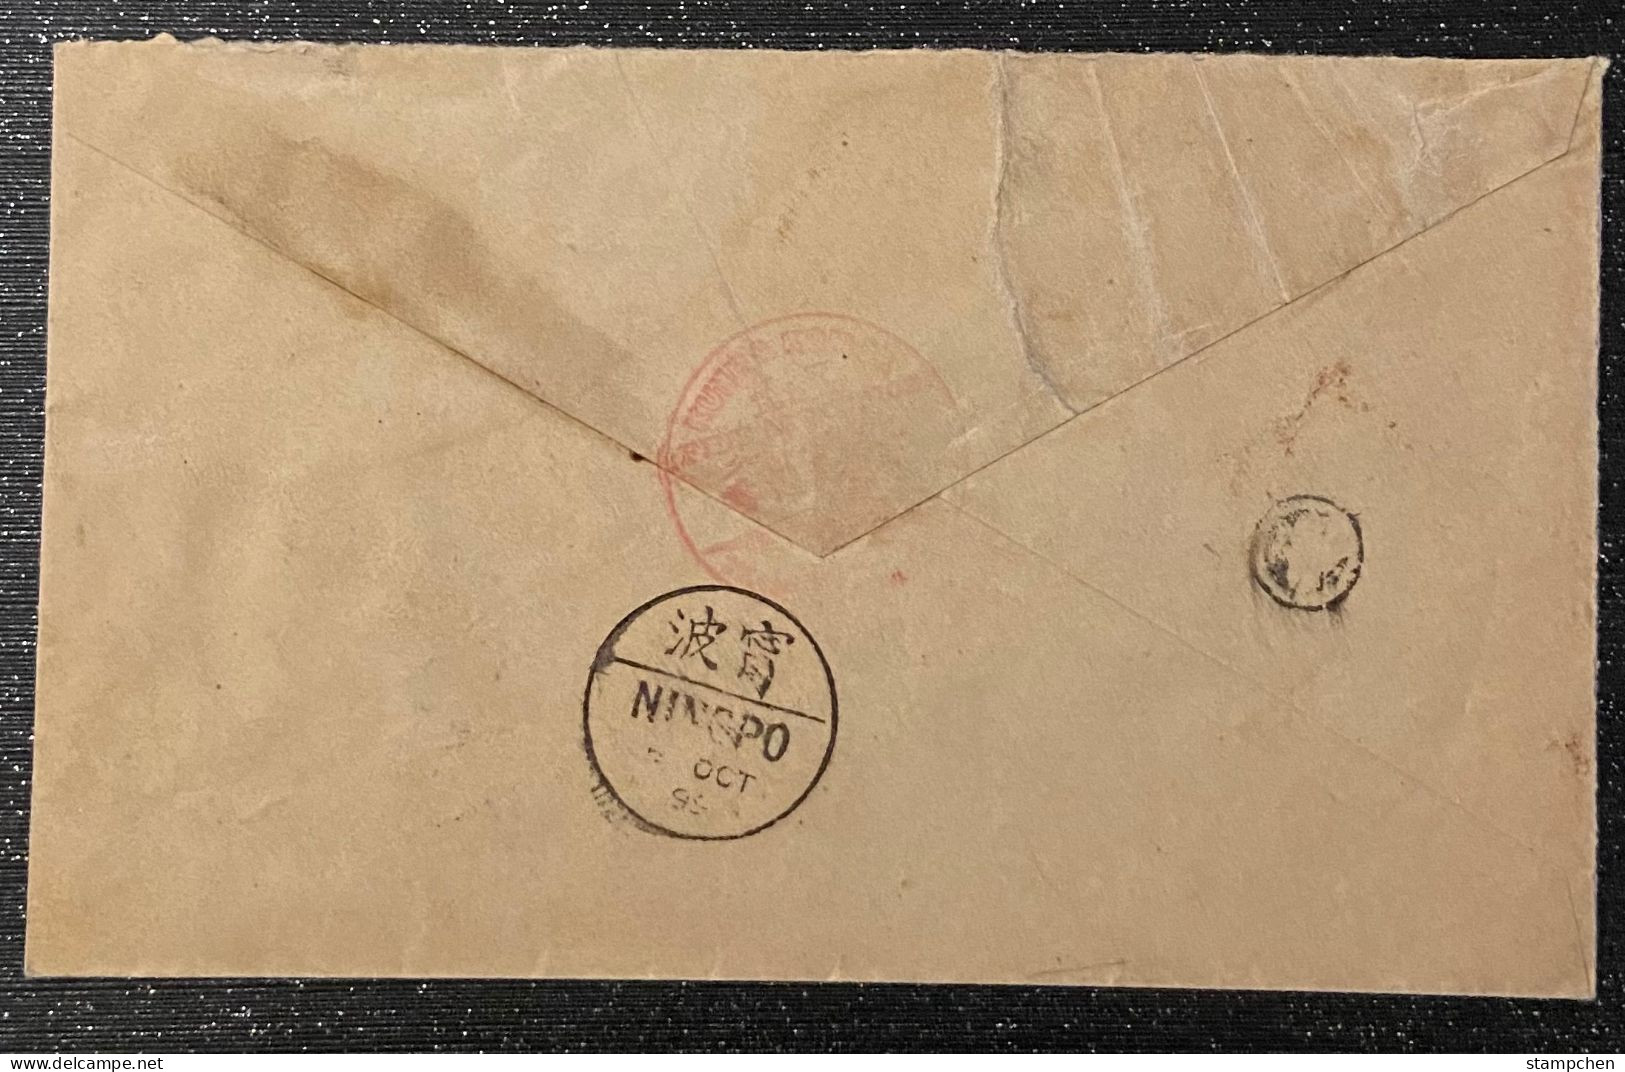 1899 Cover Affixed Red Revenue 1 Cent, Shanghai Sent To Ningpo - Covers & Documents